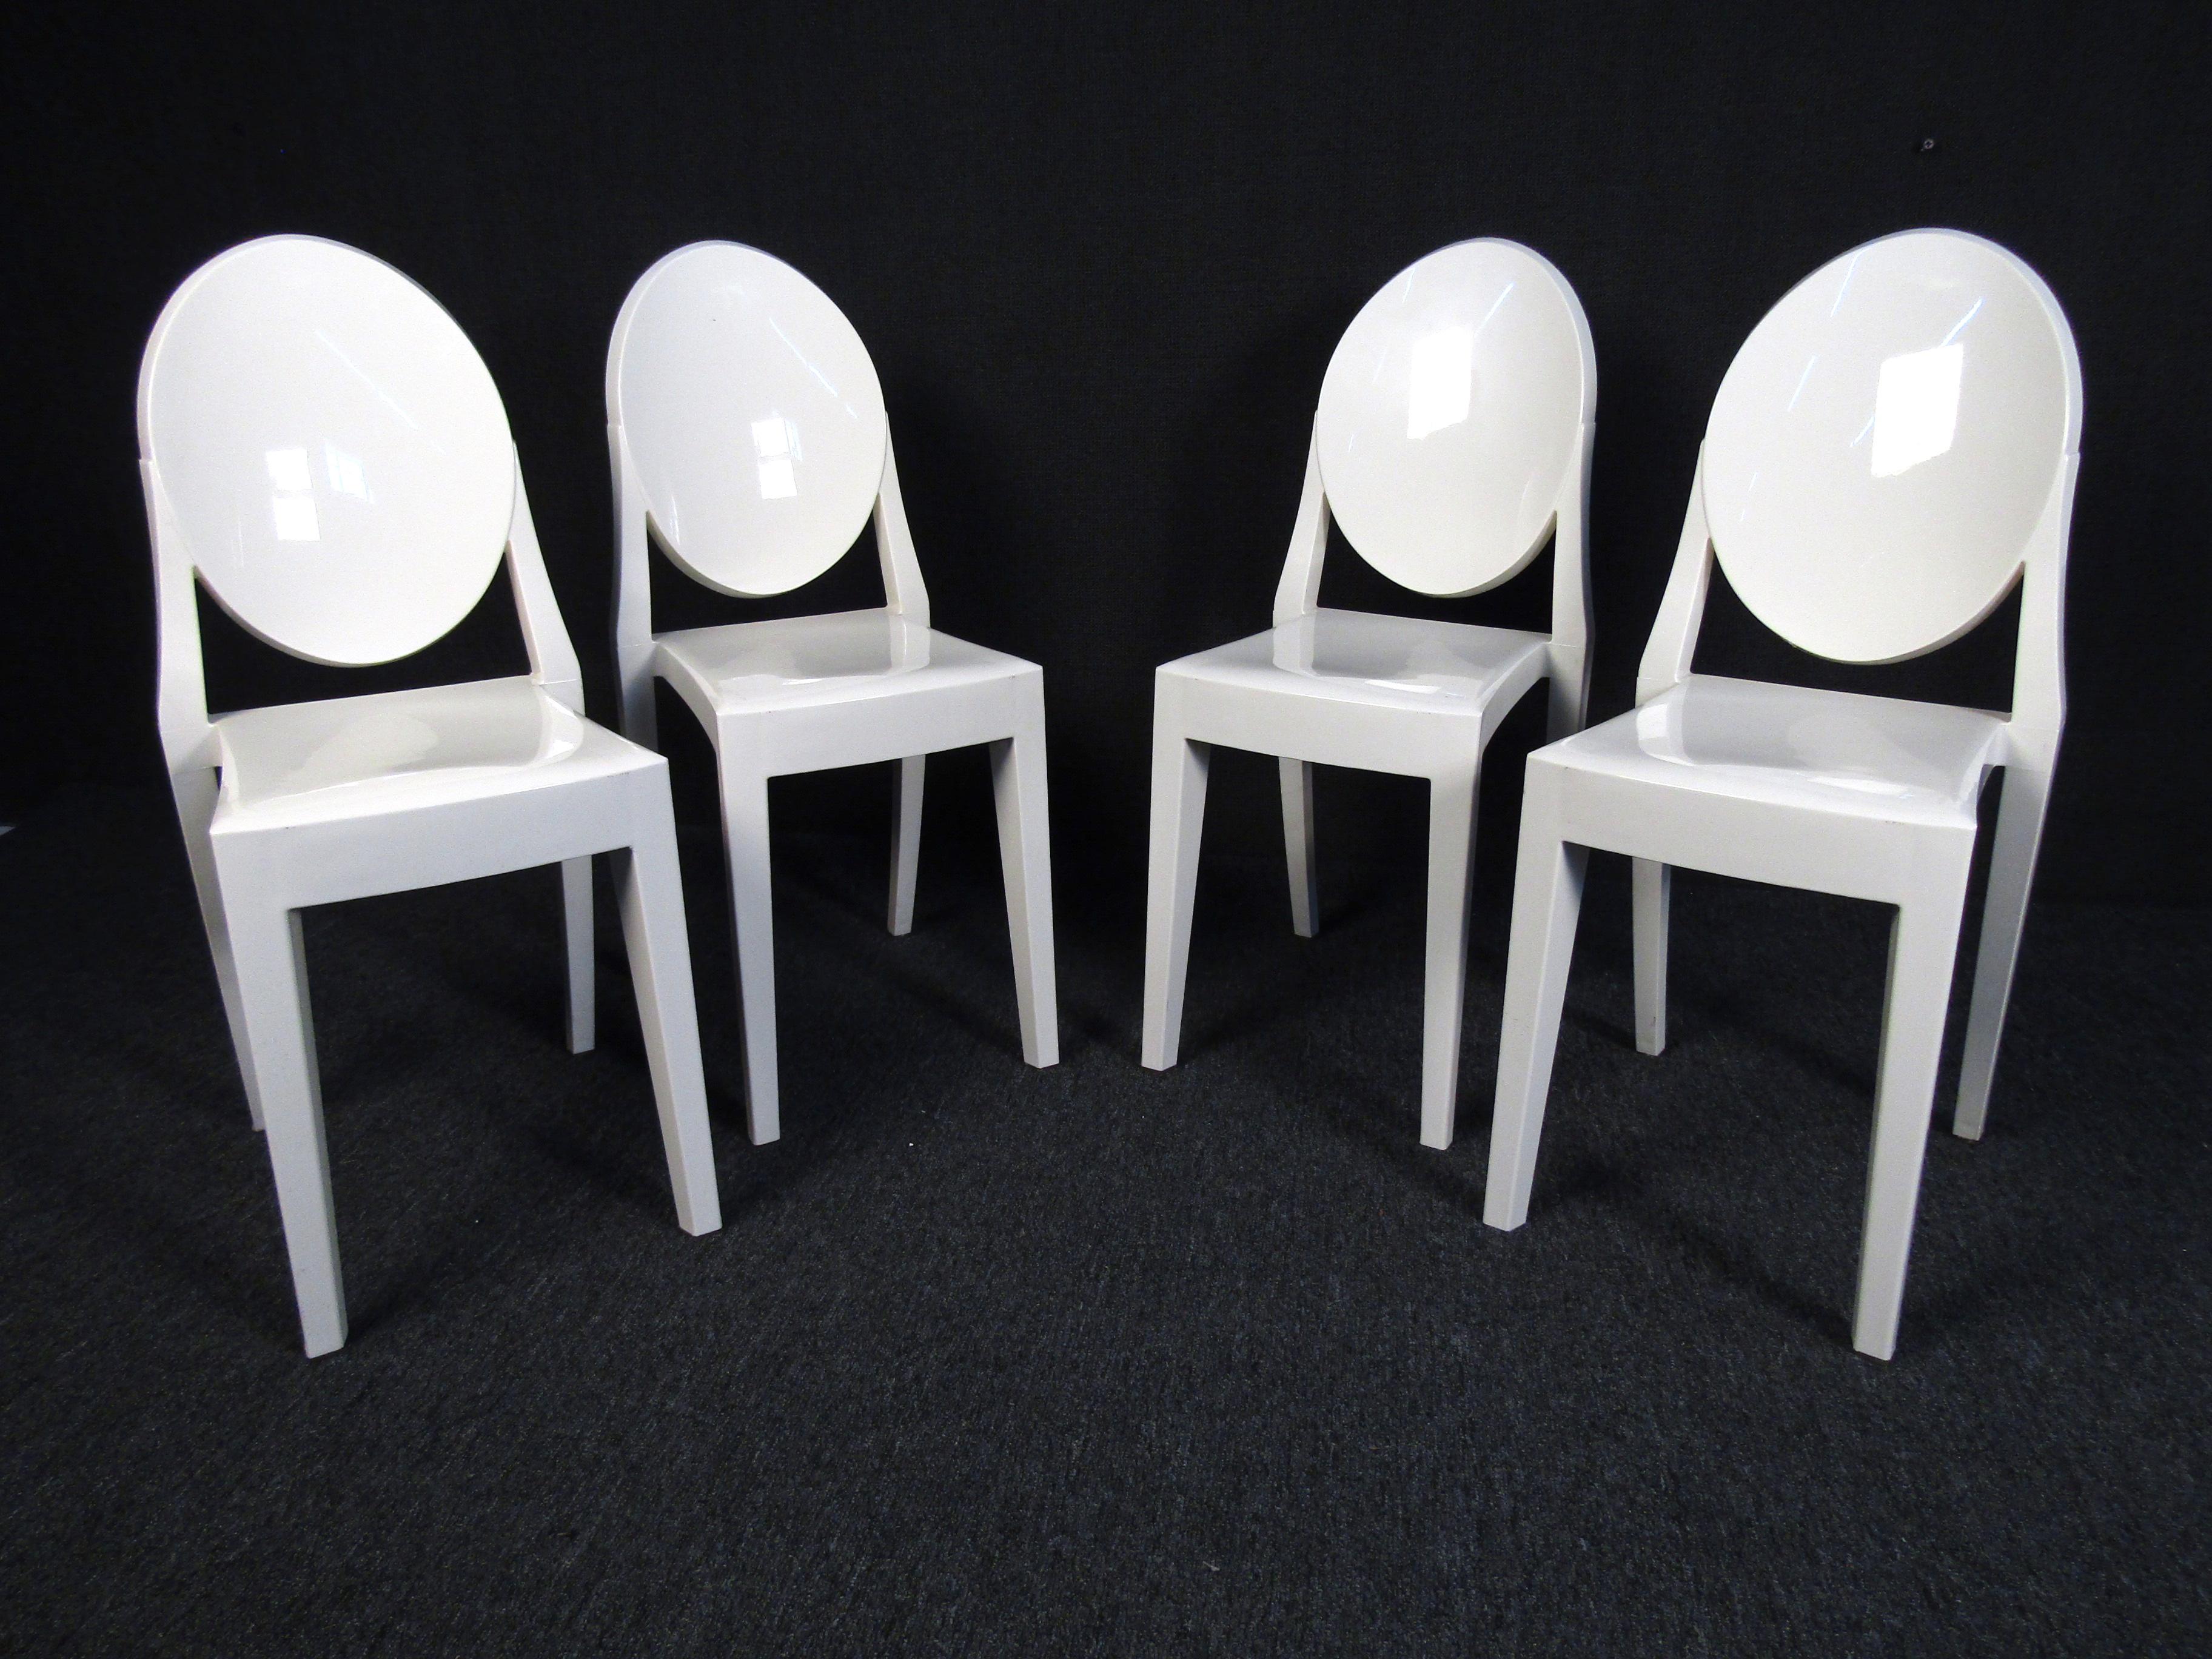 stylish plastic chairs in